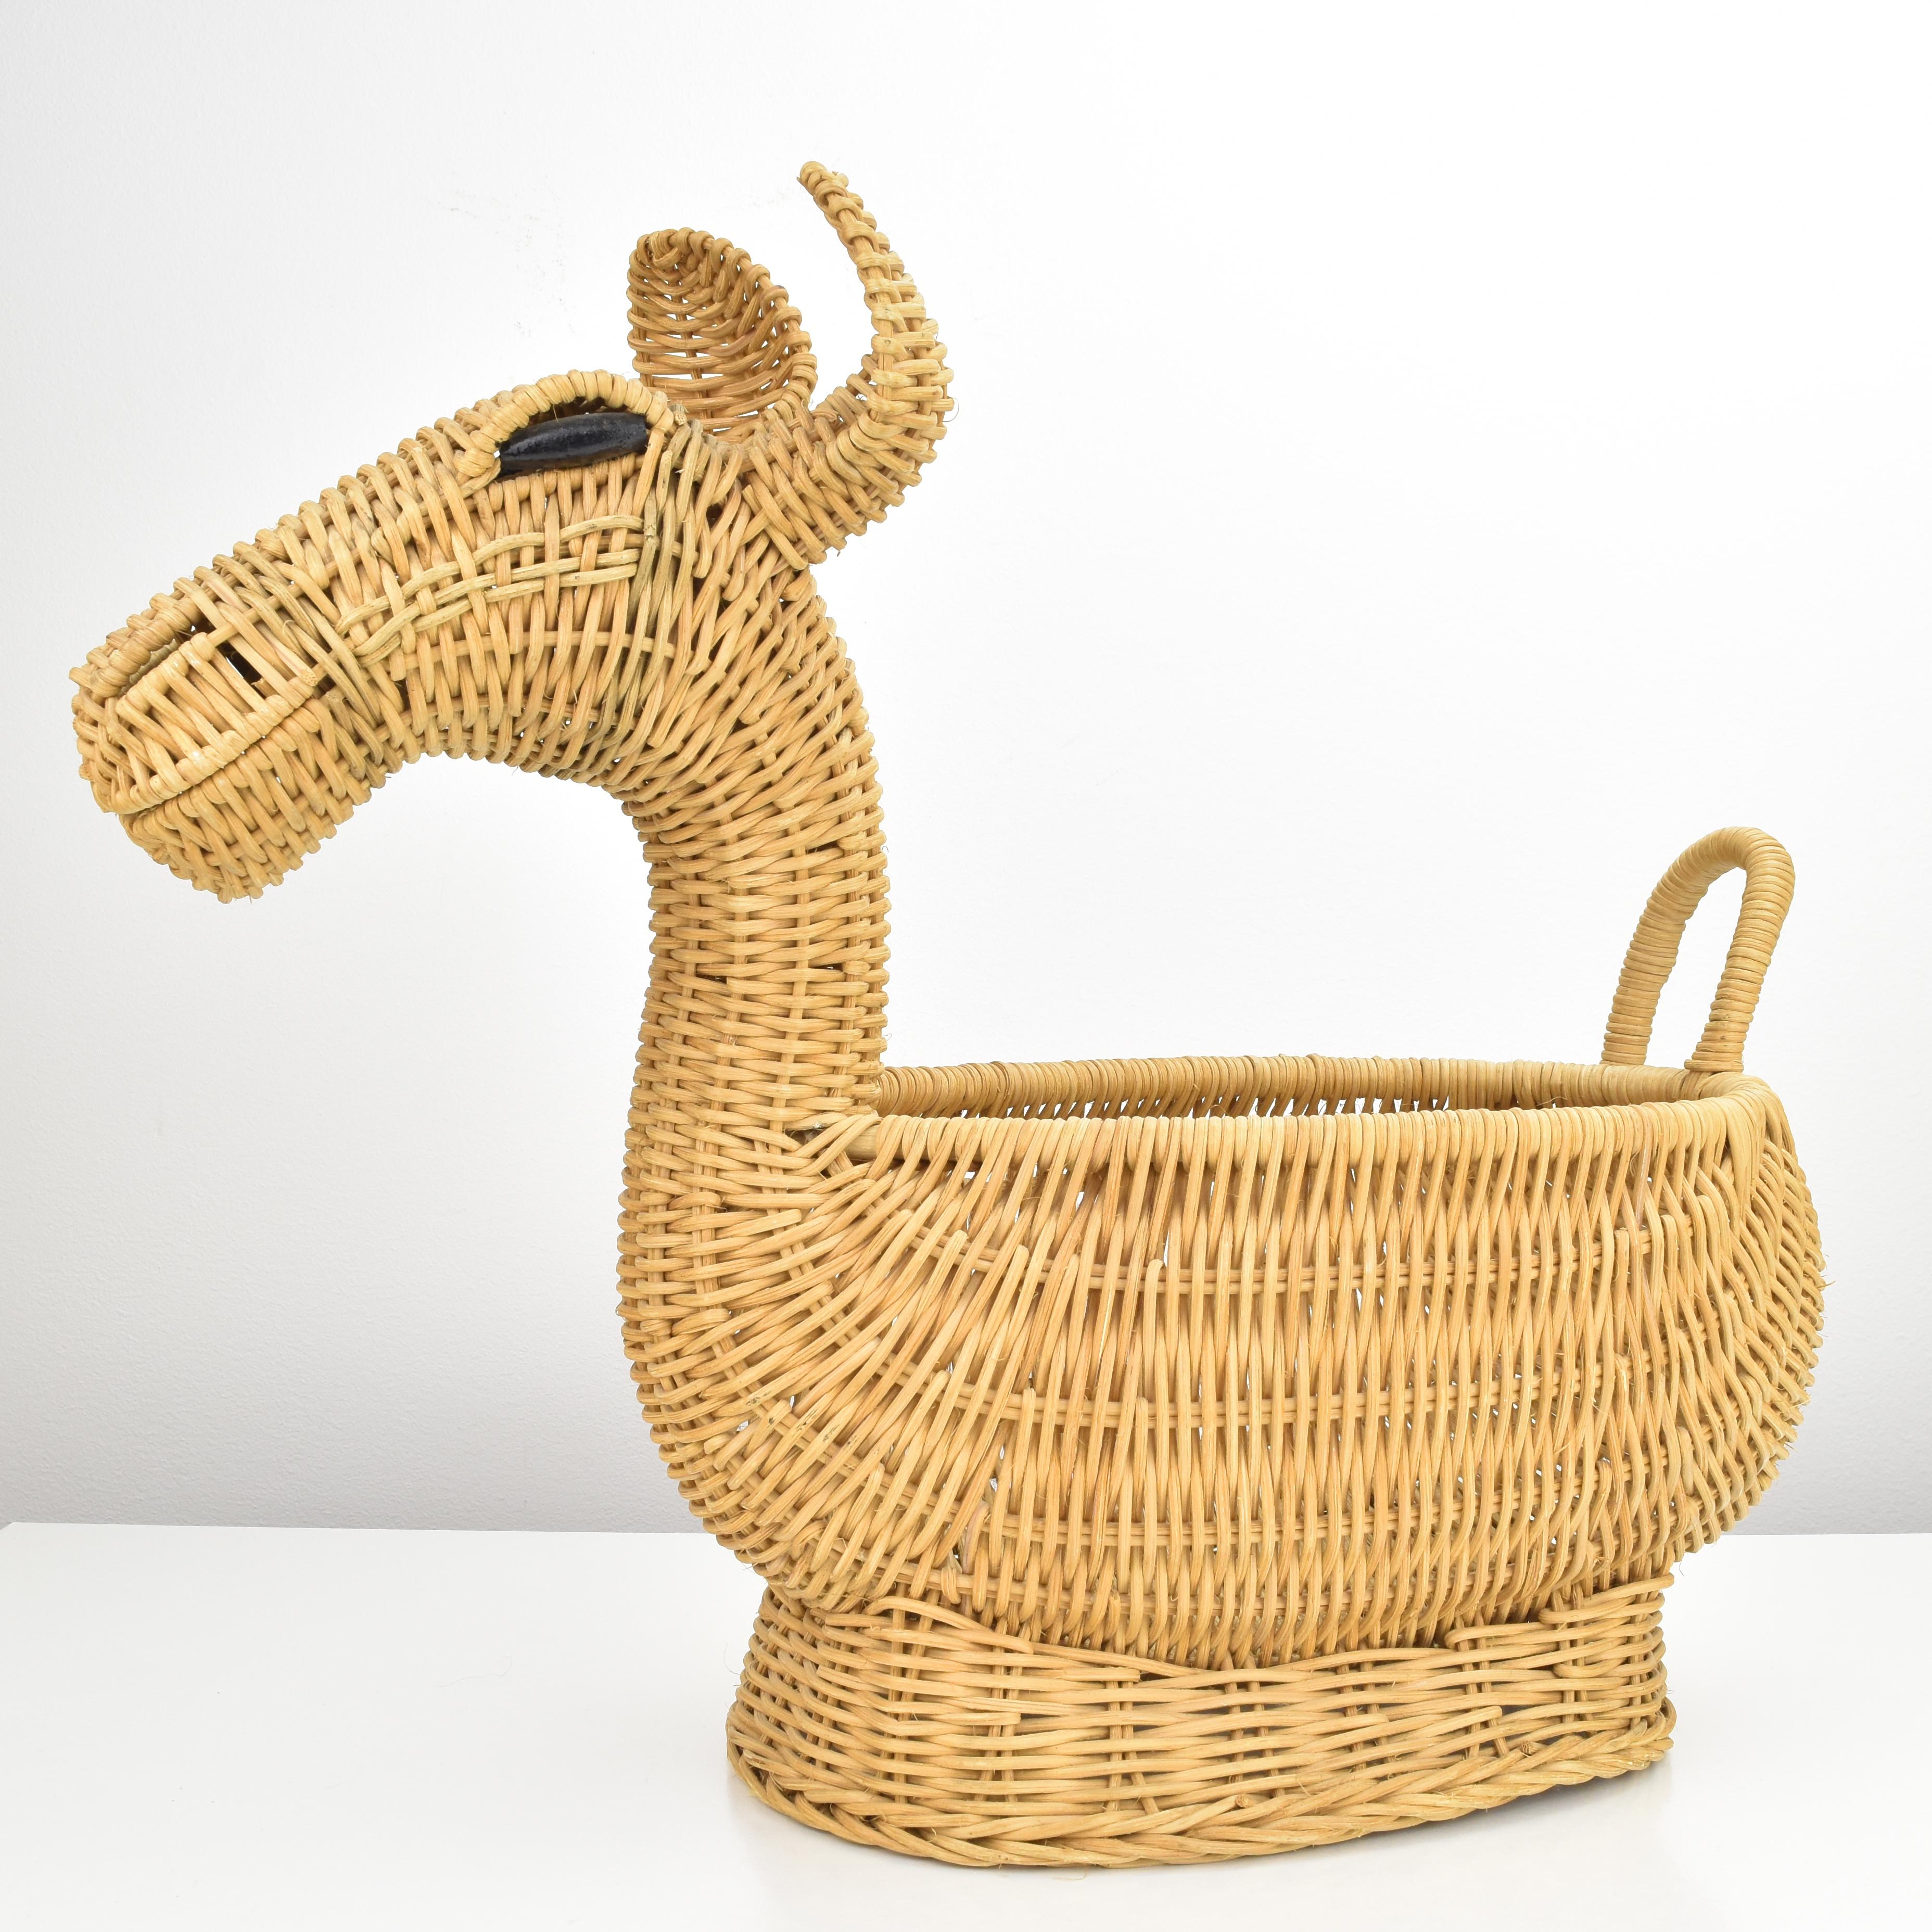 Playful vintage French wicker decorative basket in the shape of an alpaca, lama or camel in the style of Mario Torres. Finely crafted and in perfect condition this piece looks like unused and would be perfect for you to hold toys, fruits, or a plant.